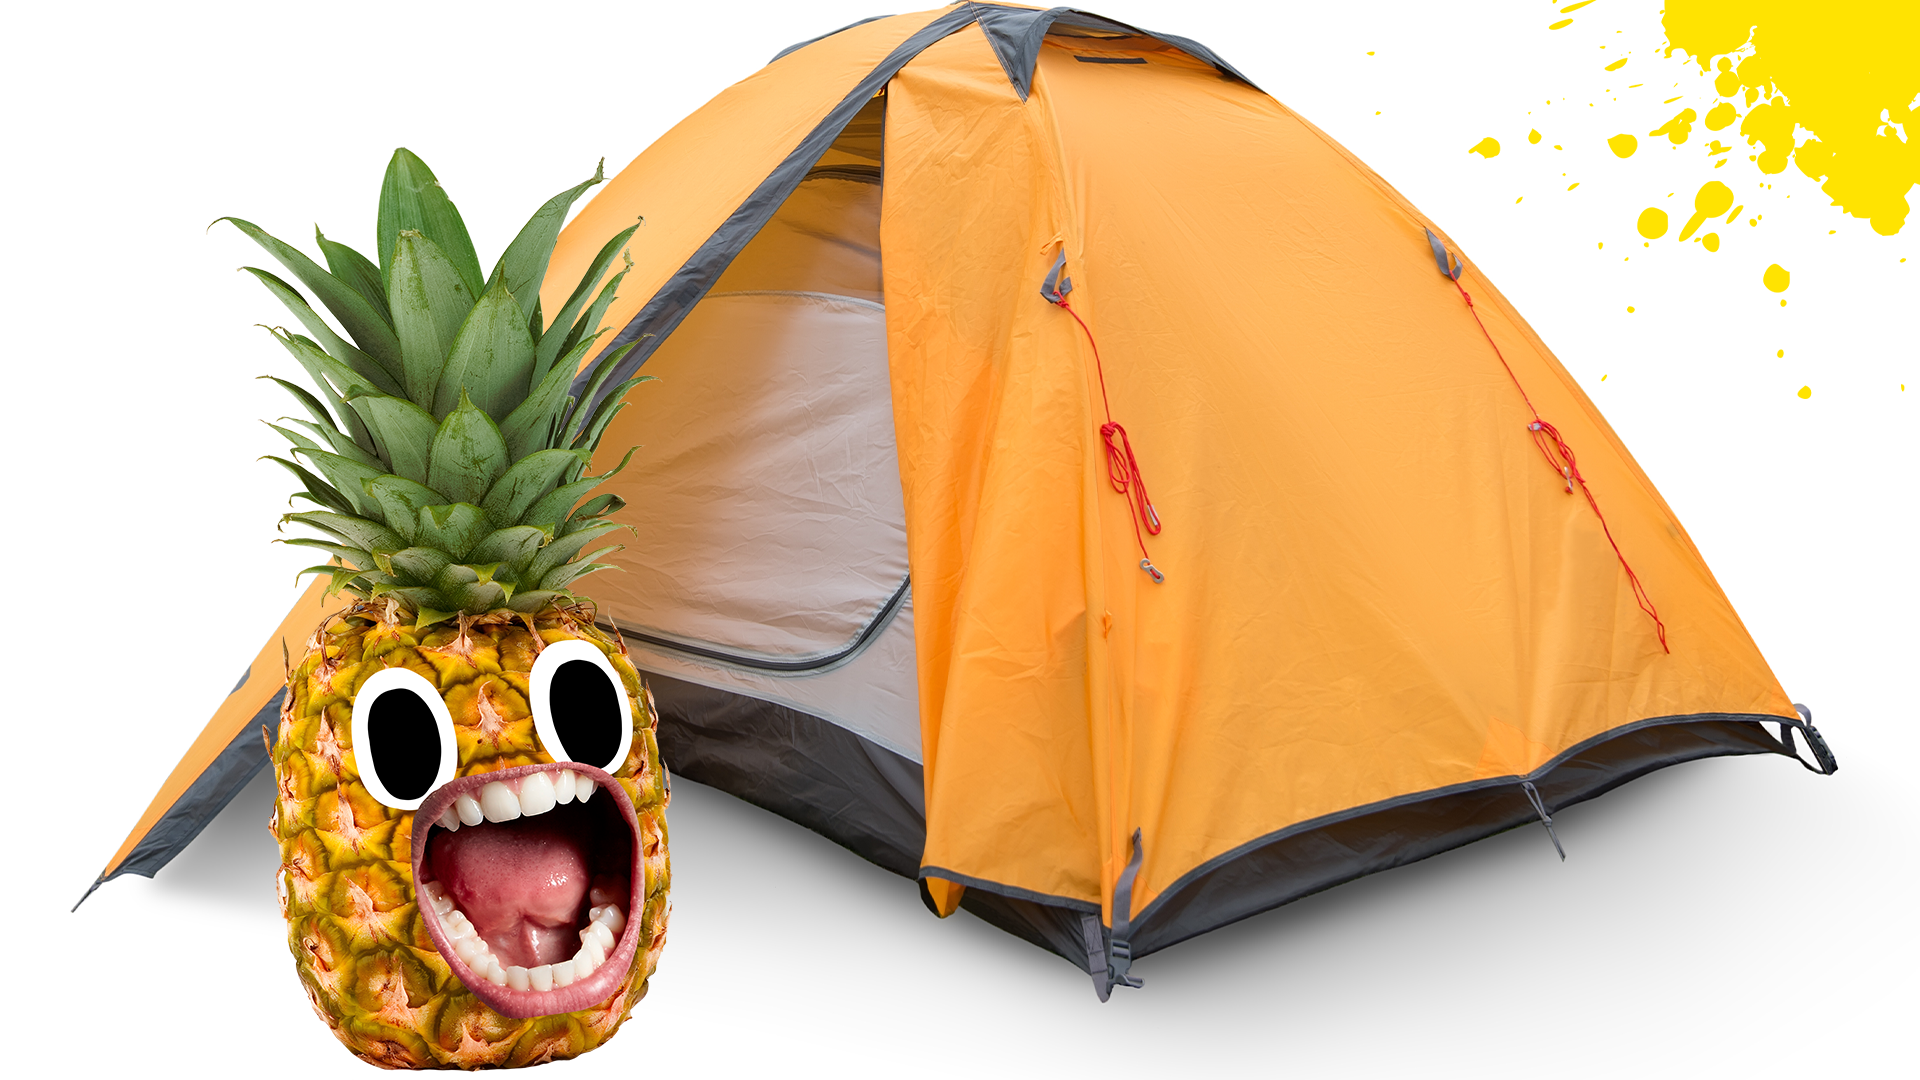 Tent on white background with screaming pineapple